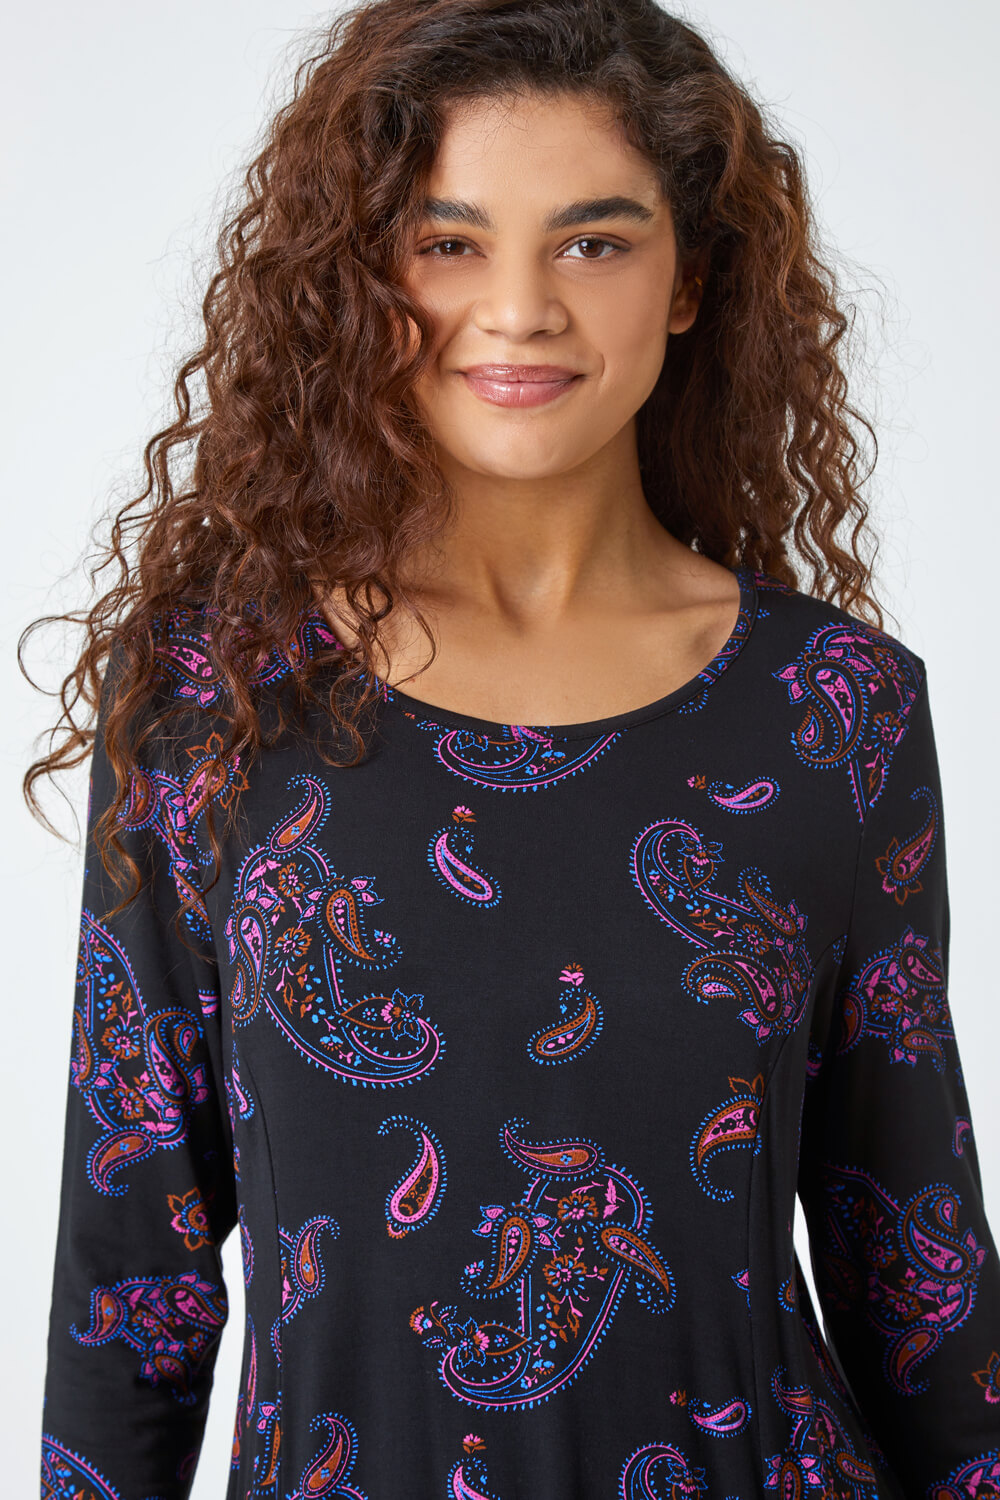 Purple Paisley Pocket Detail Stretch Swing Top, Image 4 of 5